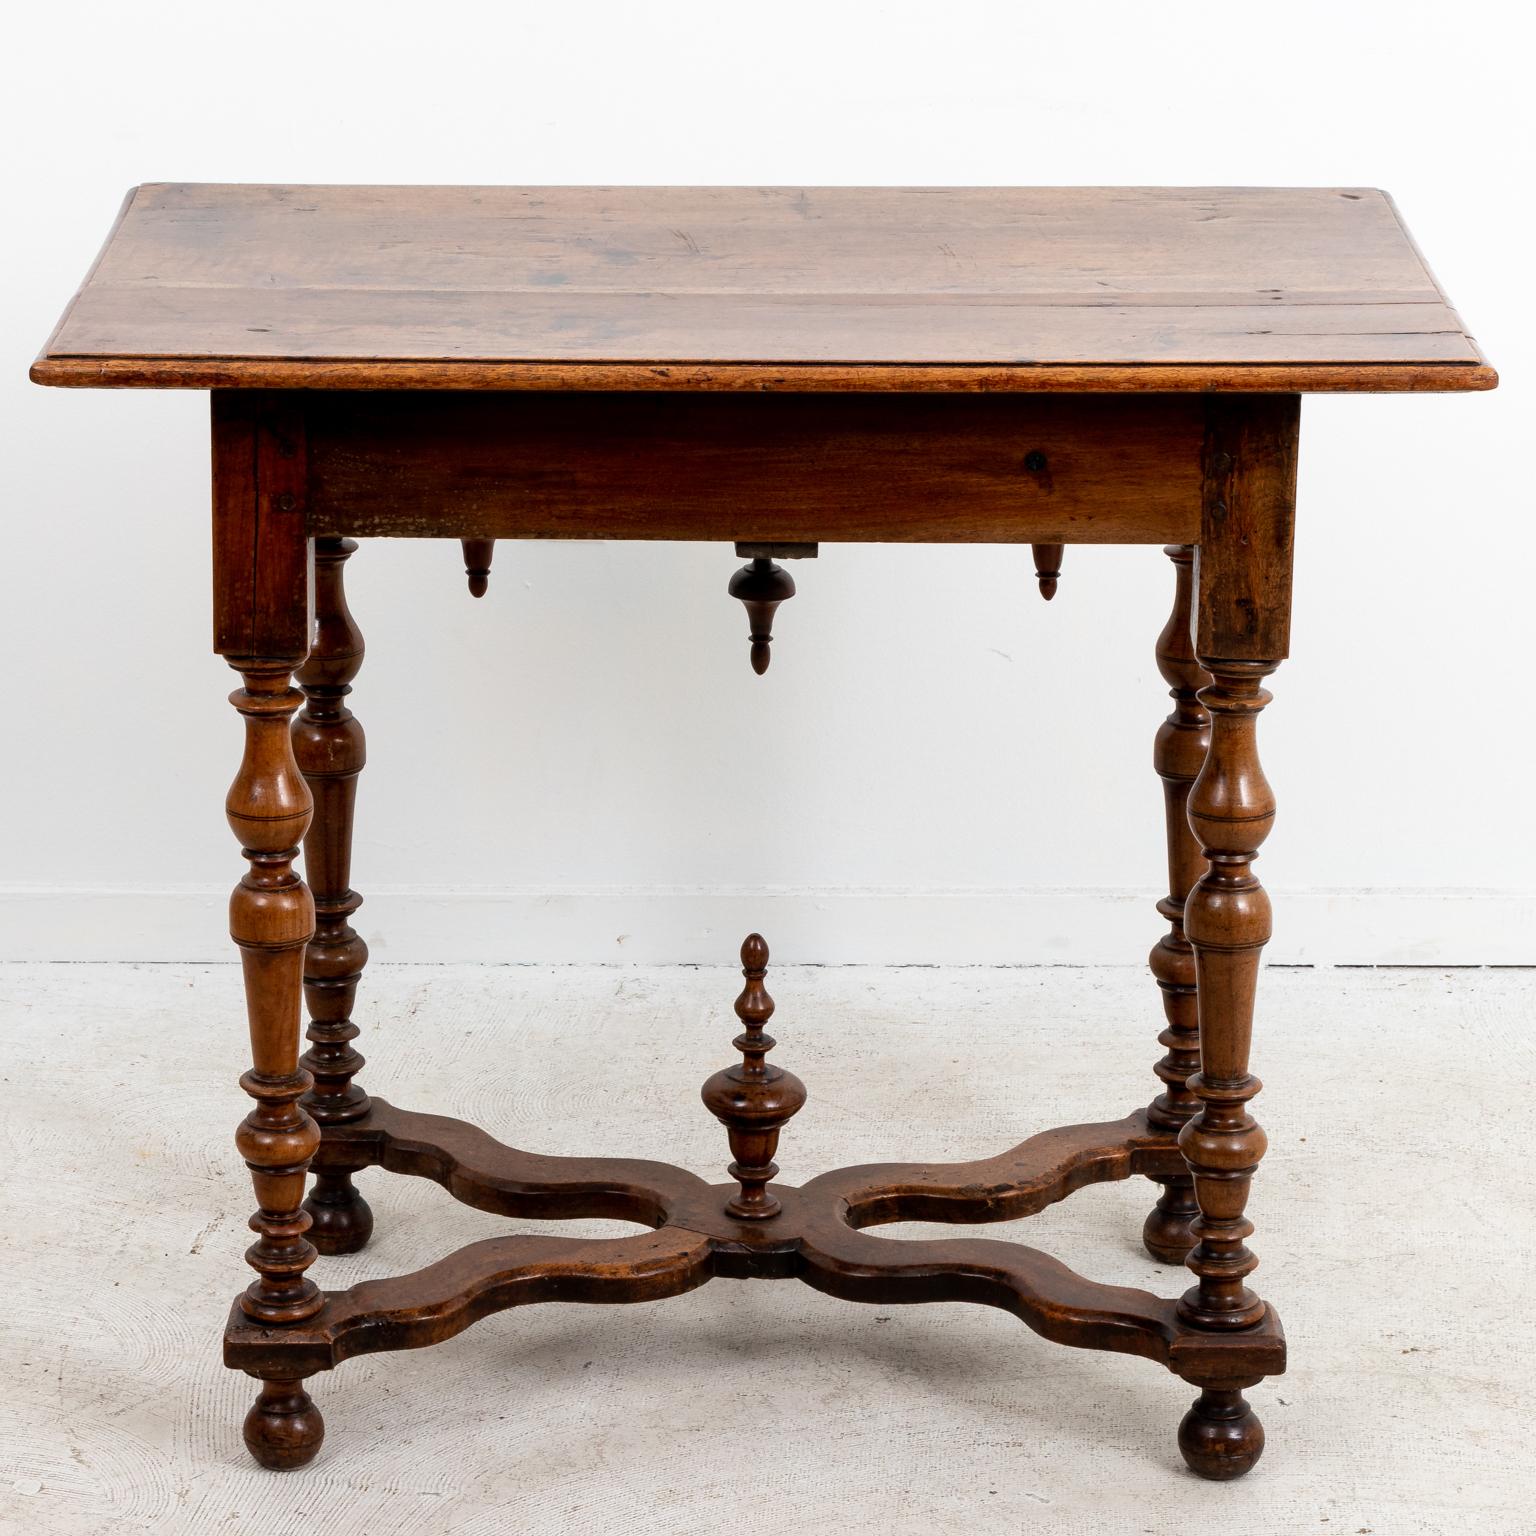 Jacobean style walnut table with single drawer and curved skirt accented by pendant finials, circa 19th century. The base also features vase-and-ring turned legs on ball feet, bottom X-shaped cross stretcher, and large finial at the center of the